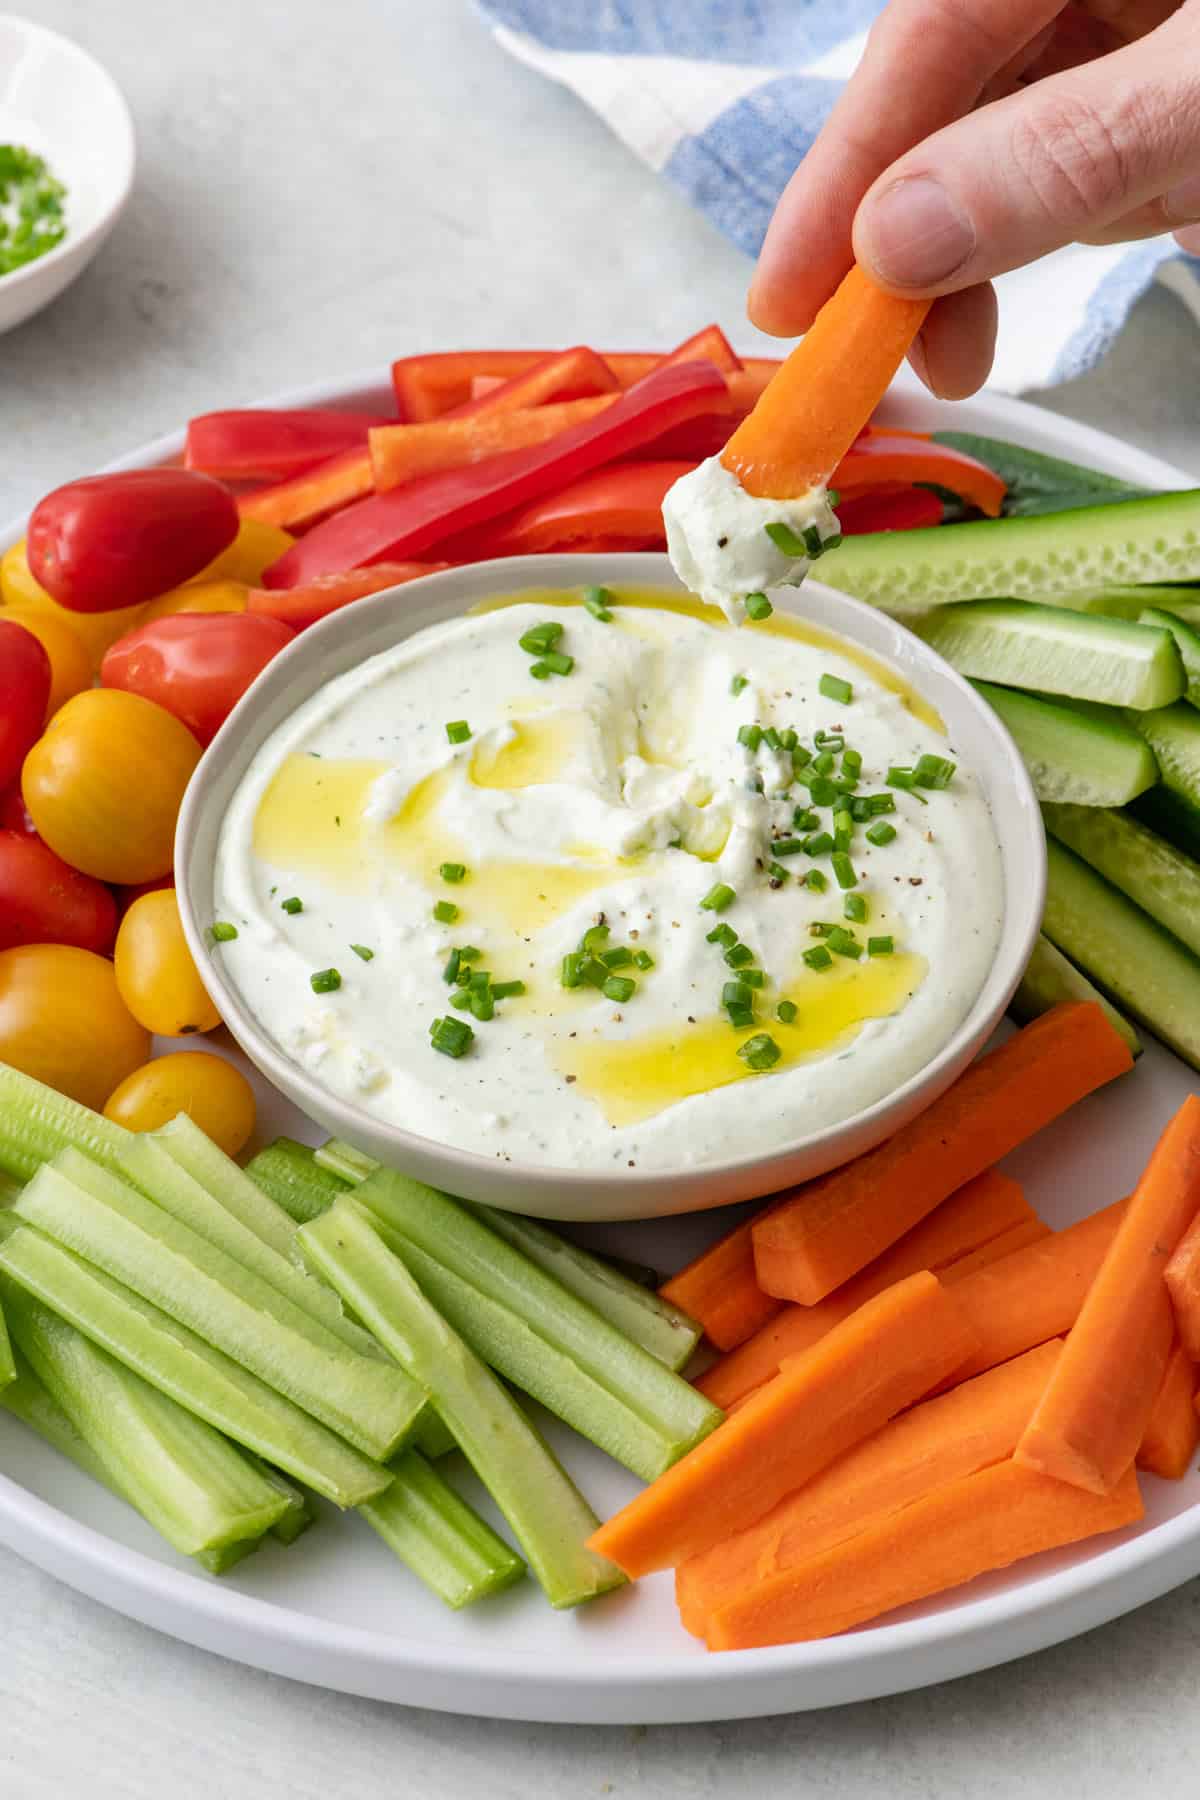 Carrot being dipped into a bowl of whipped cottage cheese garnished with chives and olive oil. Bowl on a platter surrounded by more fresh veggies cut into sticks.